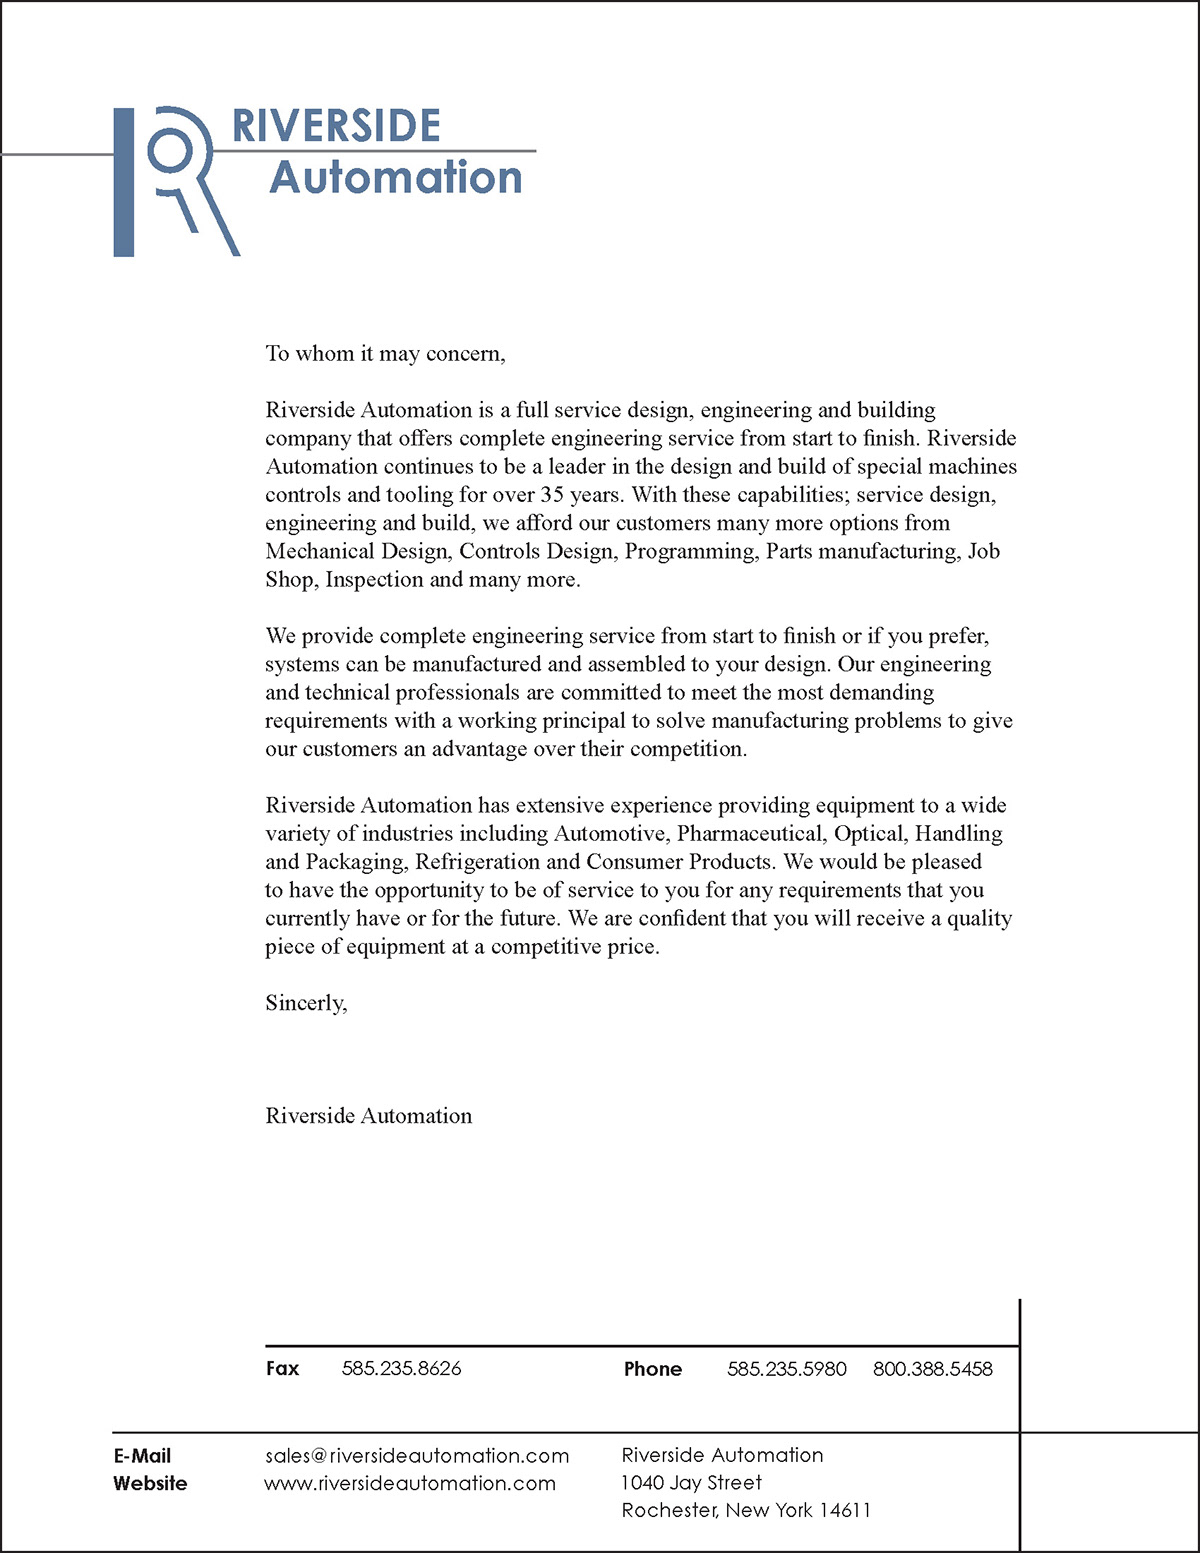 Riverside Automation logo brand re-brand automated machinery business card letterhead Truck